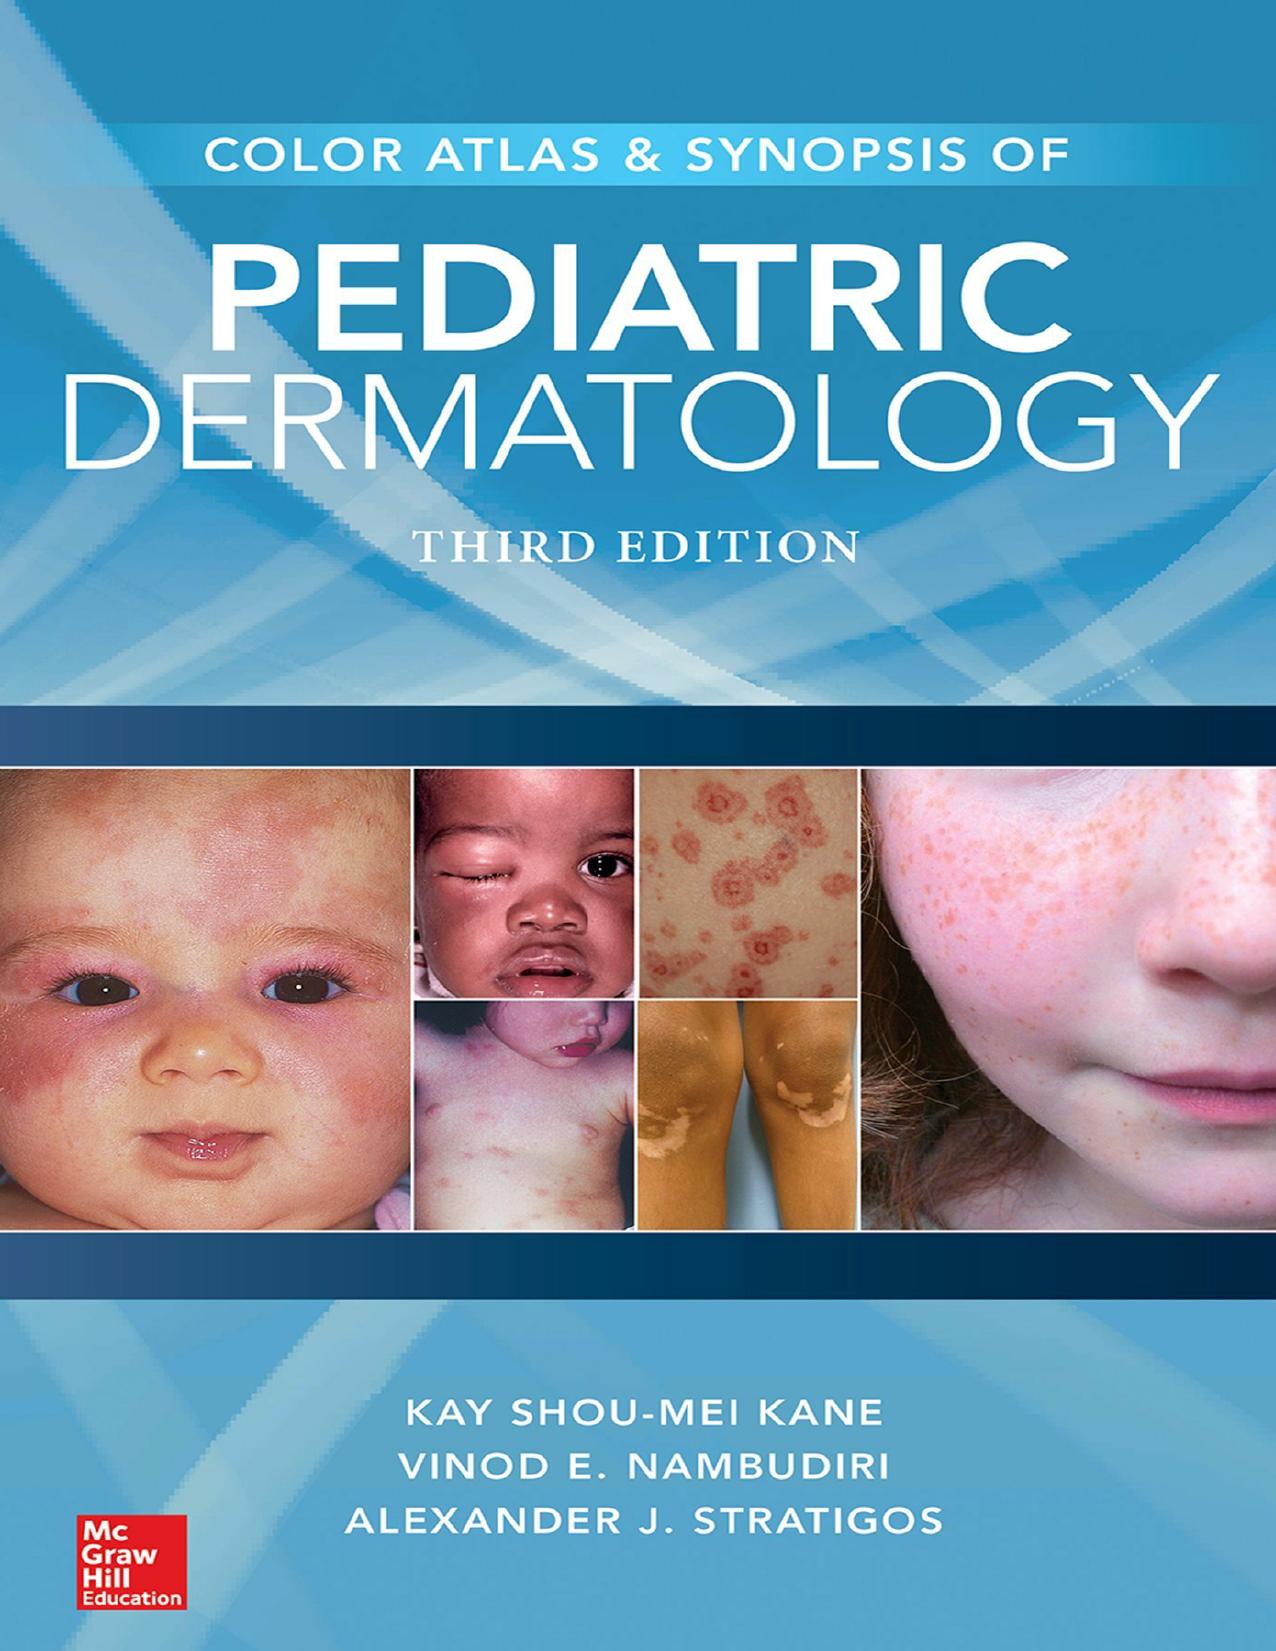 Color Atlas and Synopsis of Pediatric Dermatology 3rd ed 2015